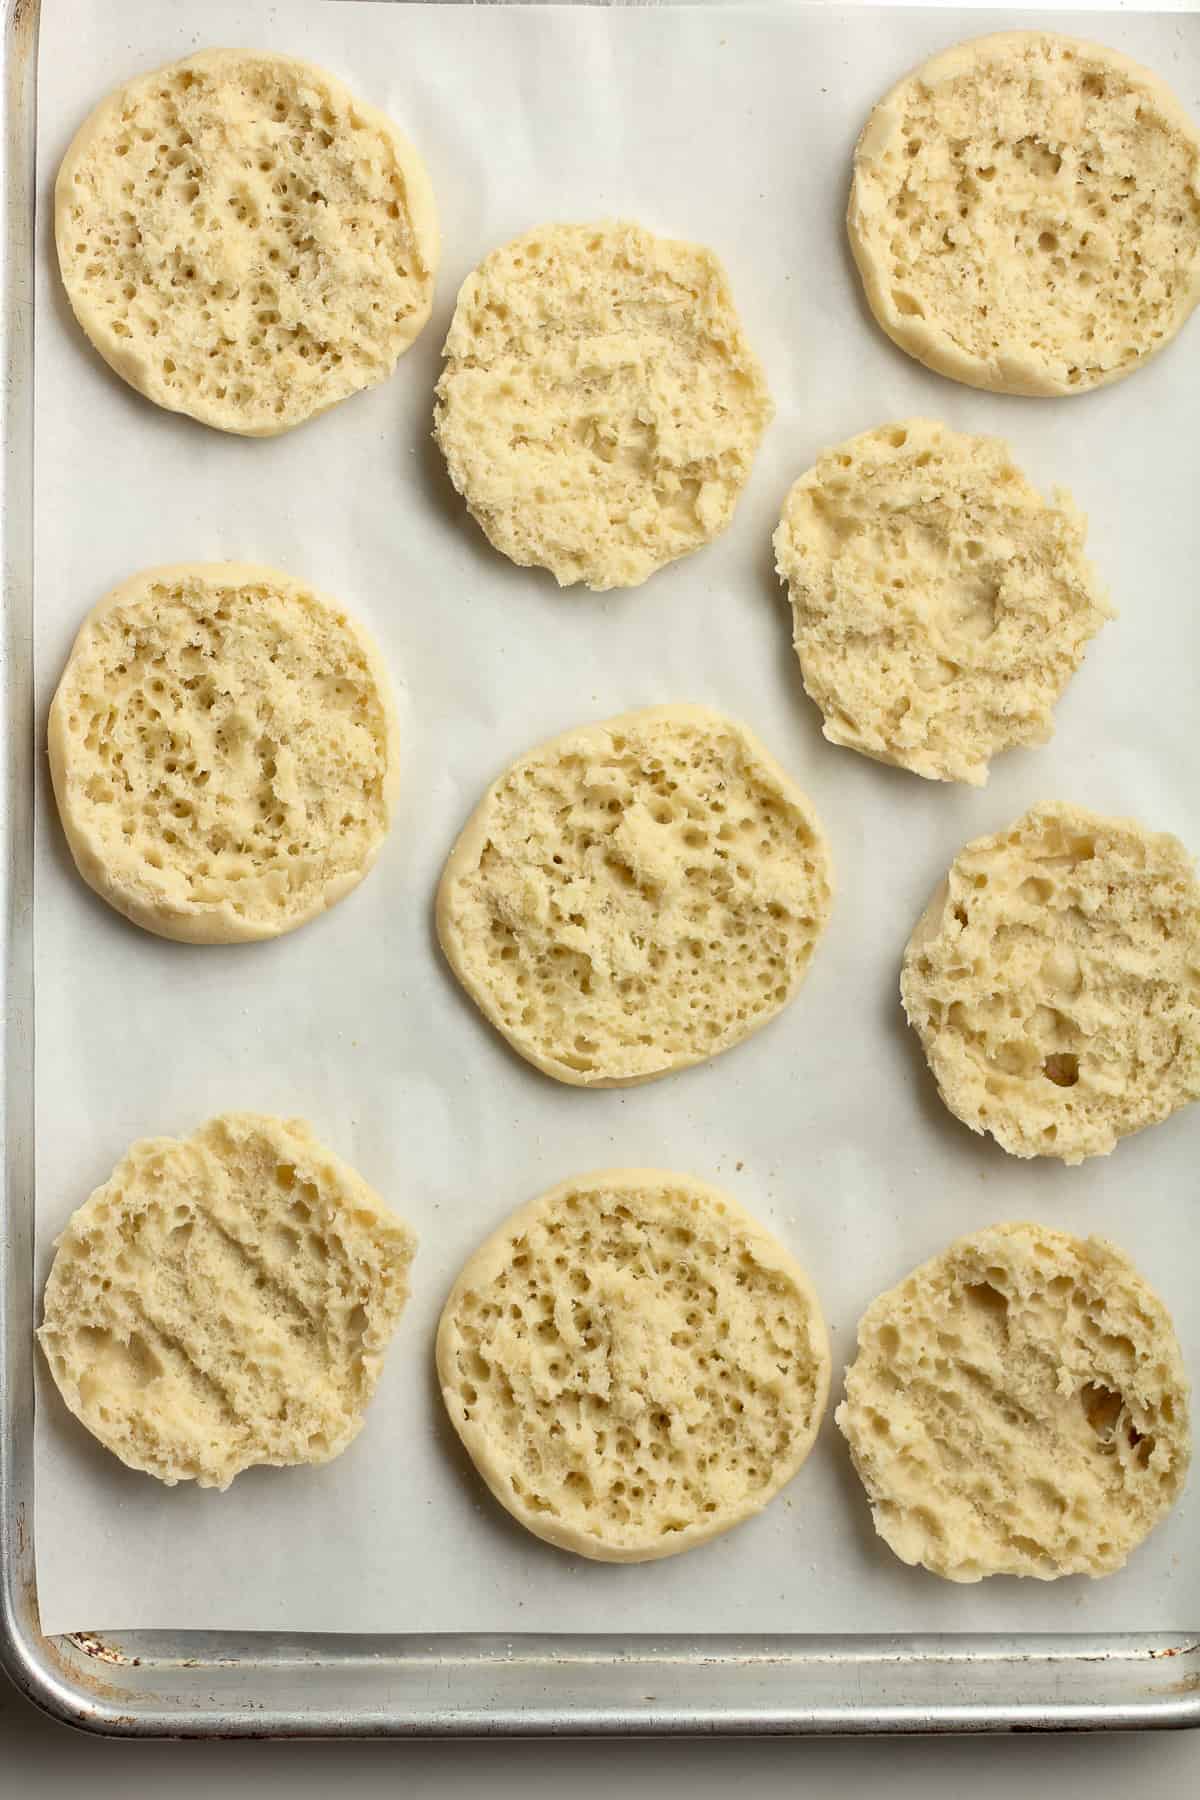 A pan of halved English muffins on a pan.